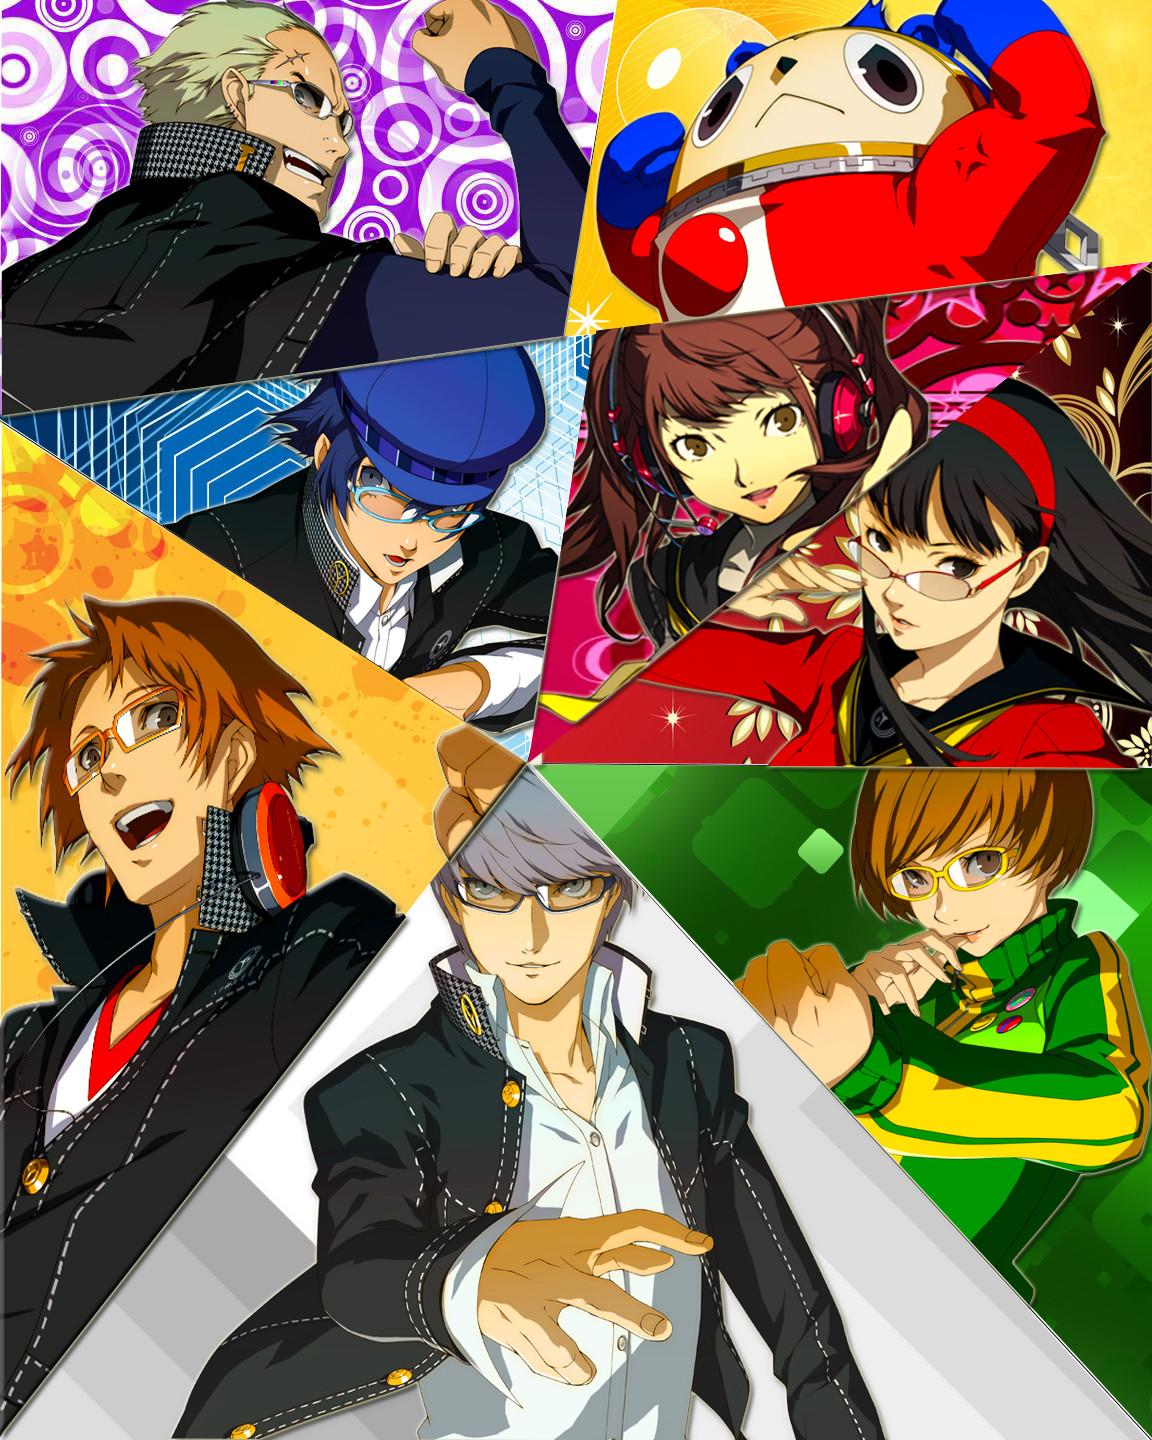 Persona 3 Portable and Persona 4 Golden Launch Event Information | Atlus  West